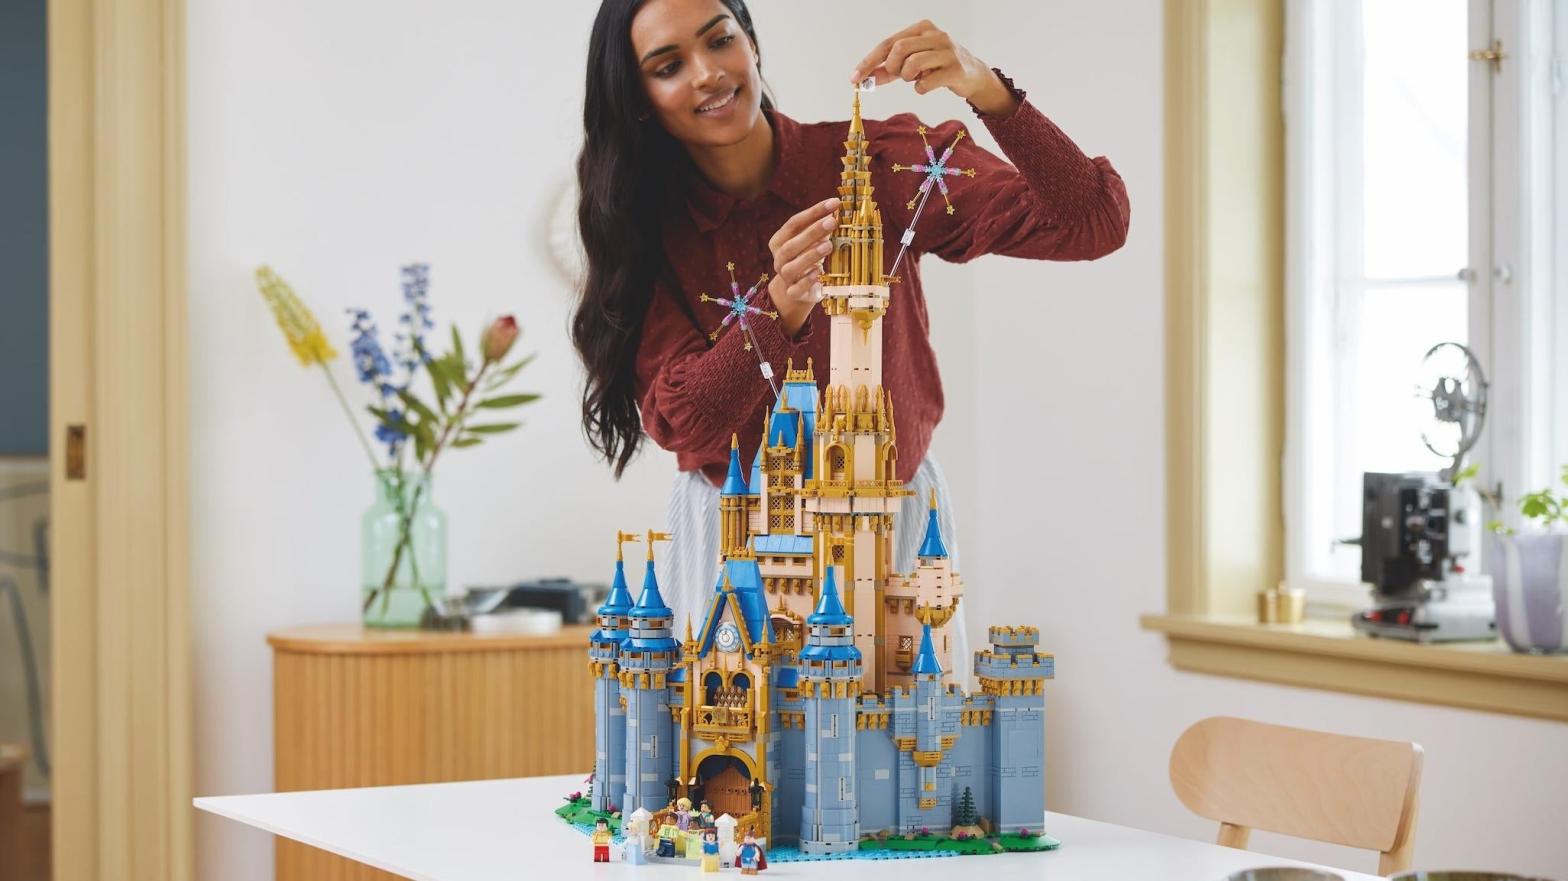 Lego's new Disney castle is almost 800 pieces larger than the last one. (Image: Lego)